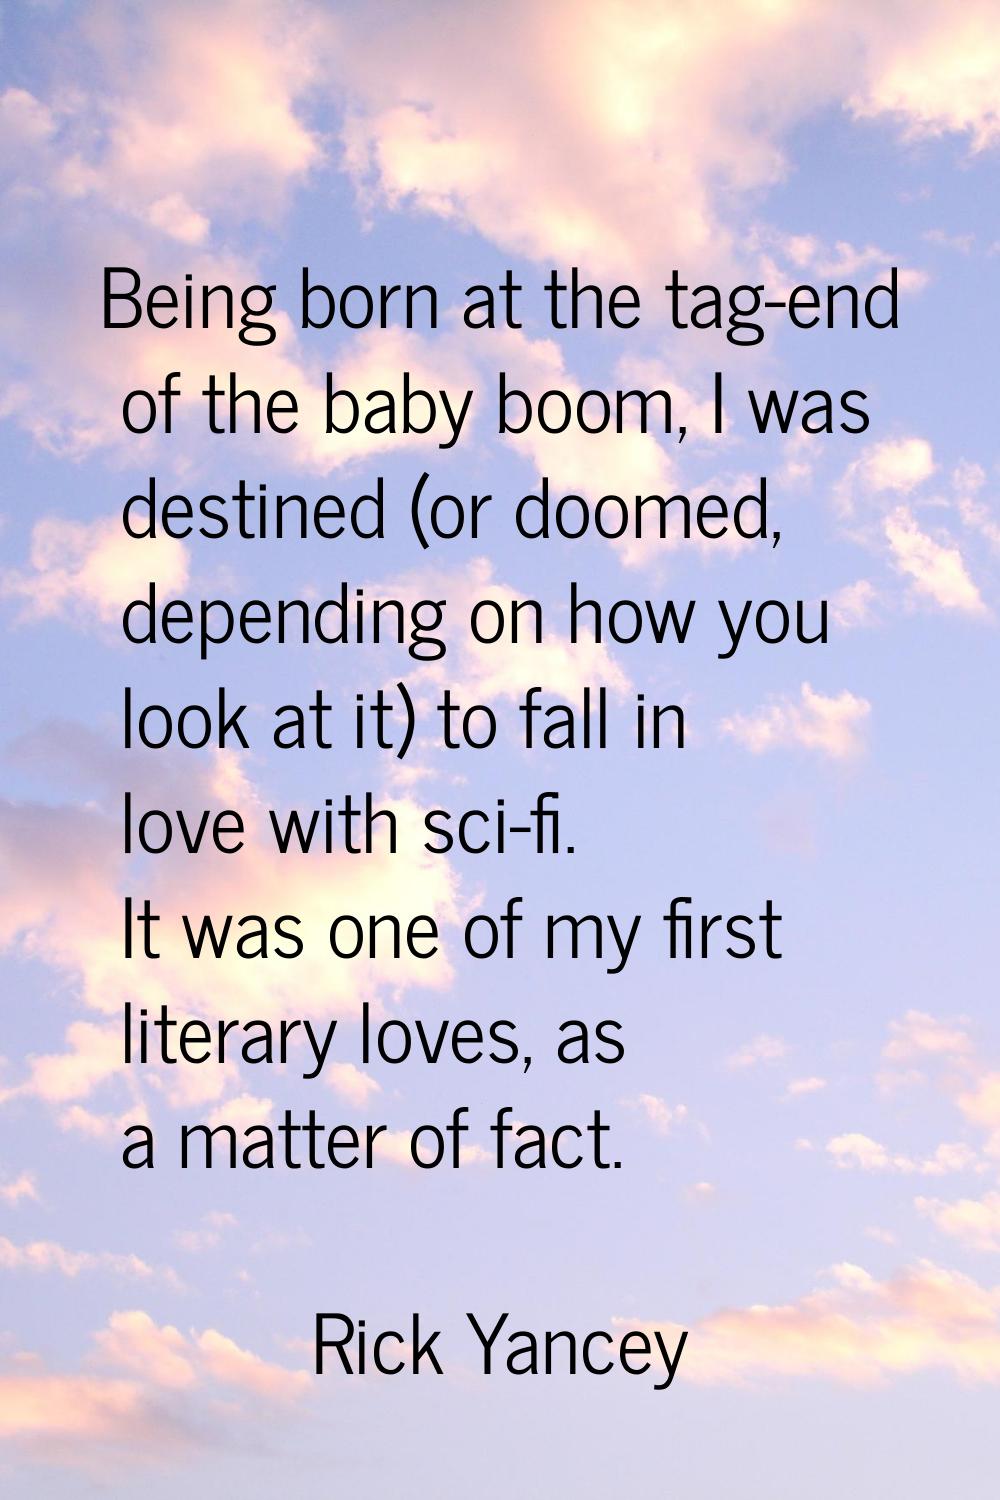 Being born at the tag-end of the baby boom, I was destined (or doomed, depending on how you look at